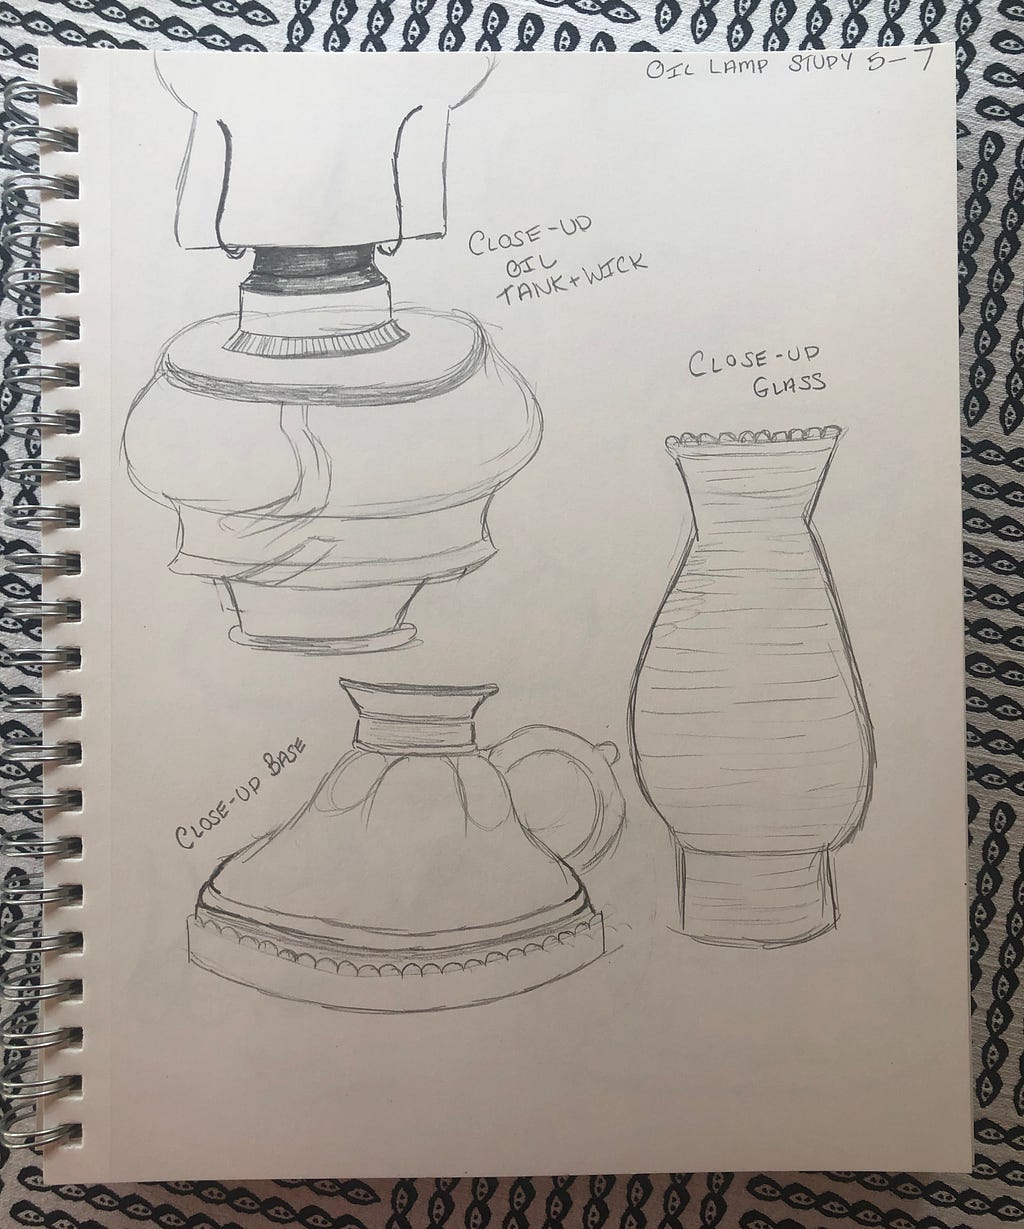 More graphite pencil studies of the oil lamp. These are extreme close-ups of parts.